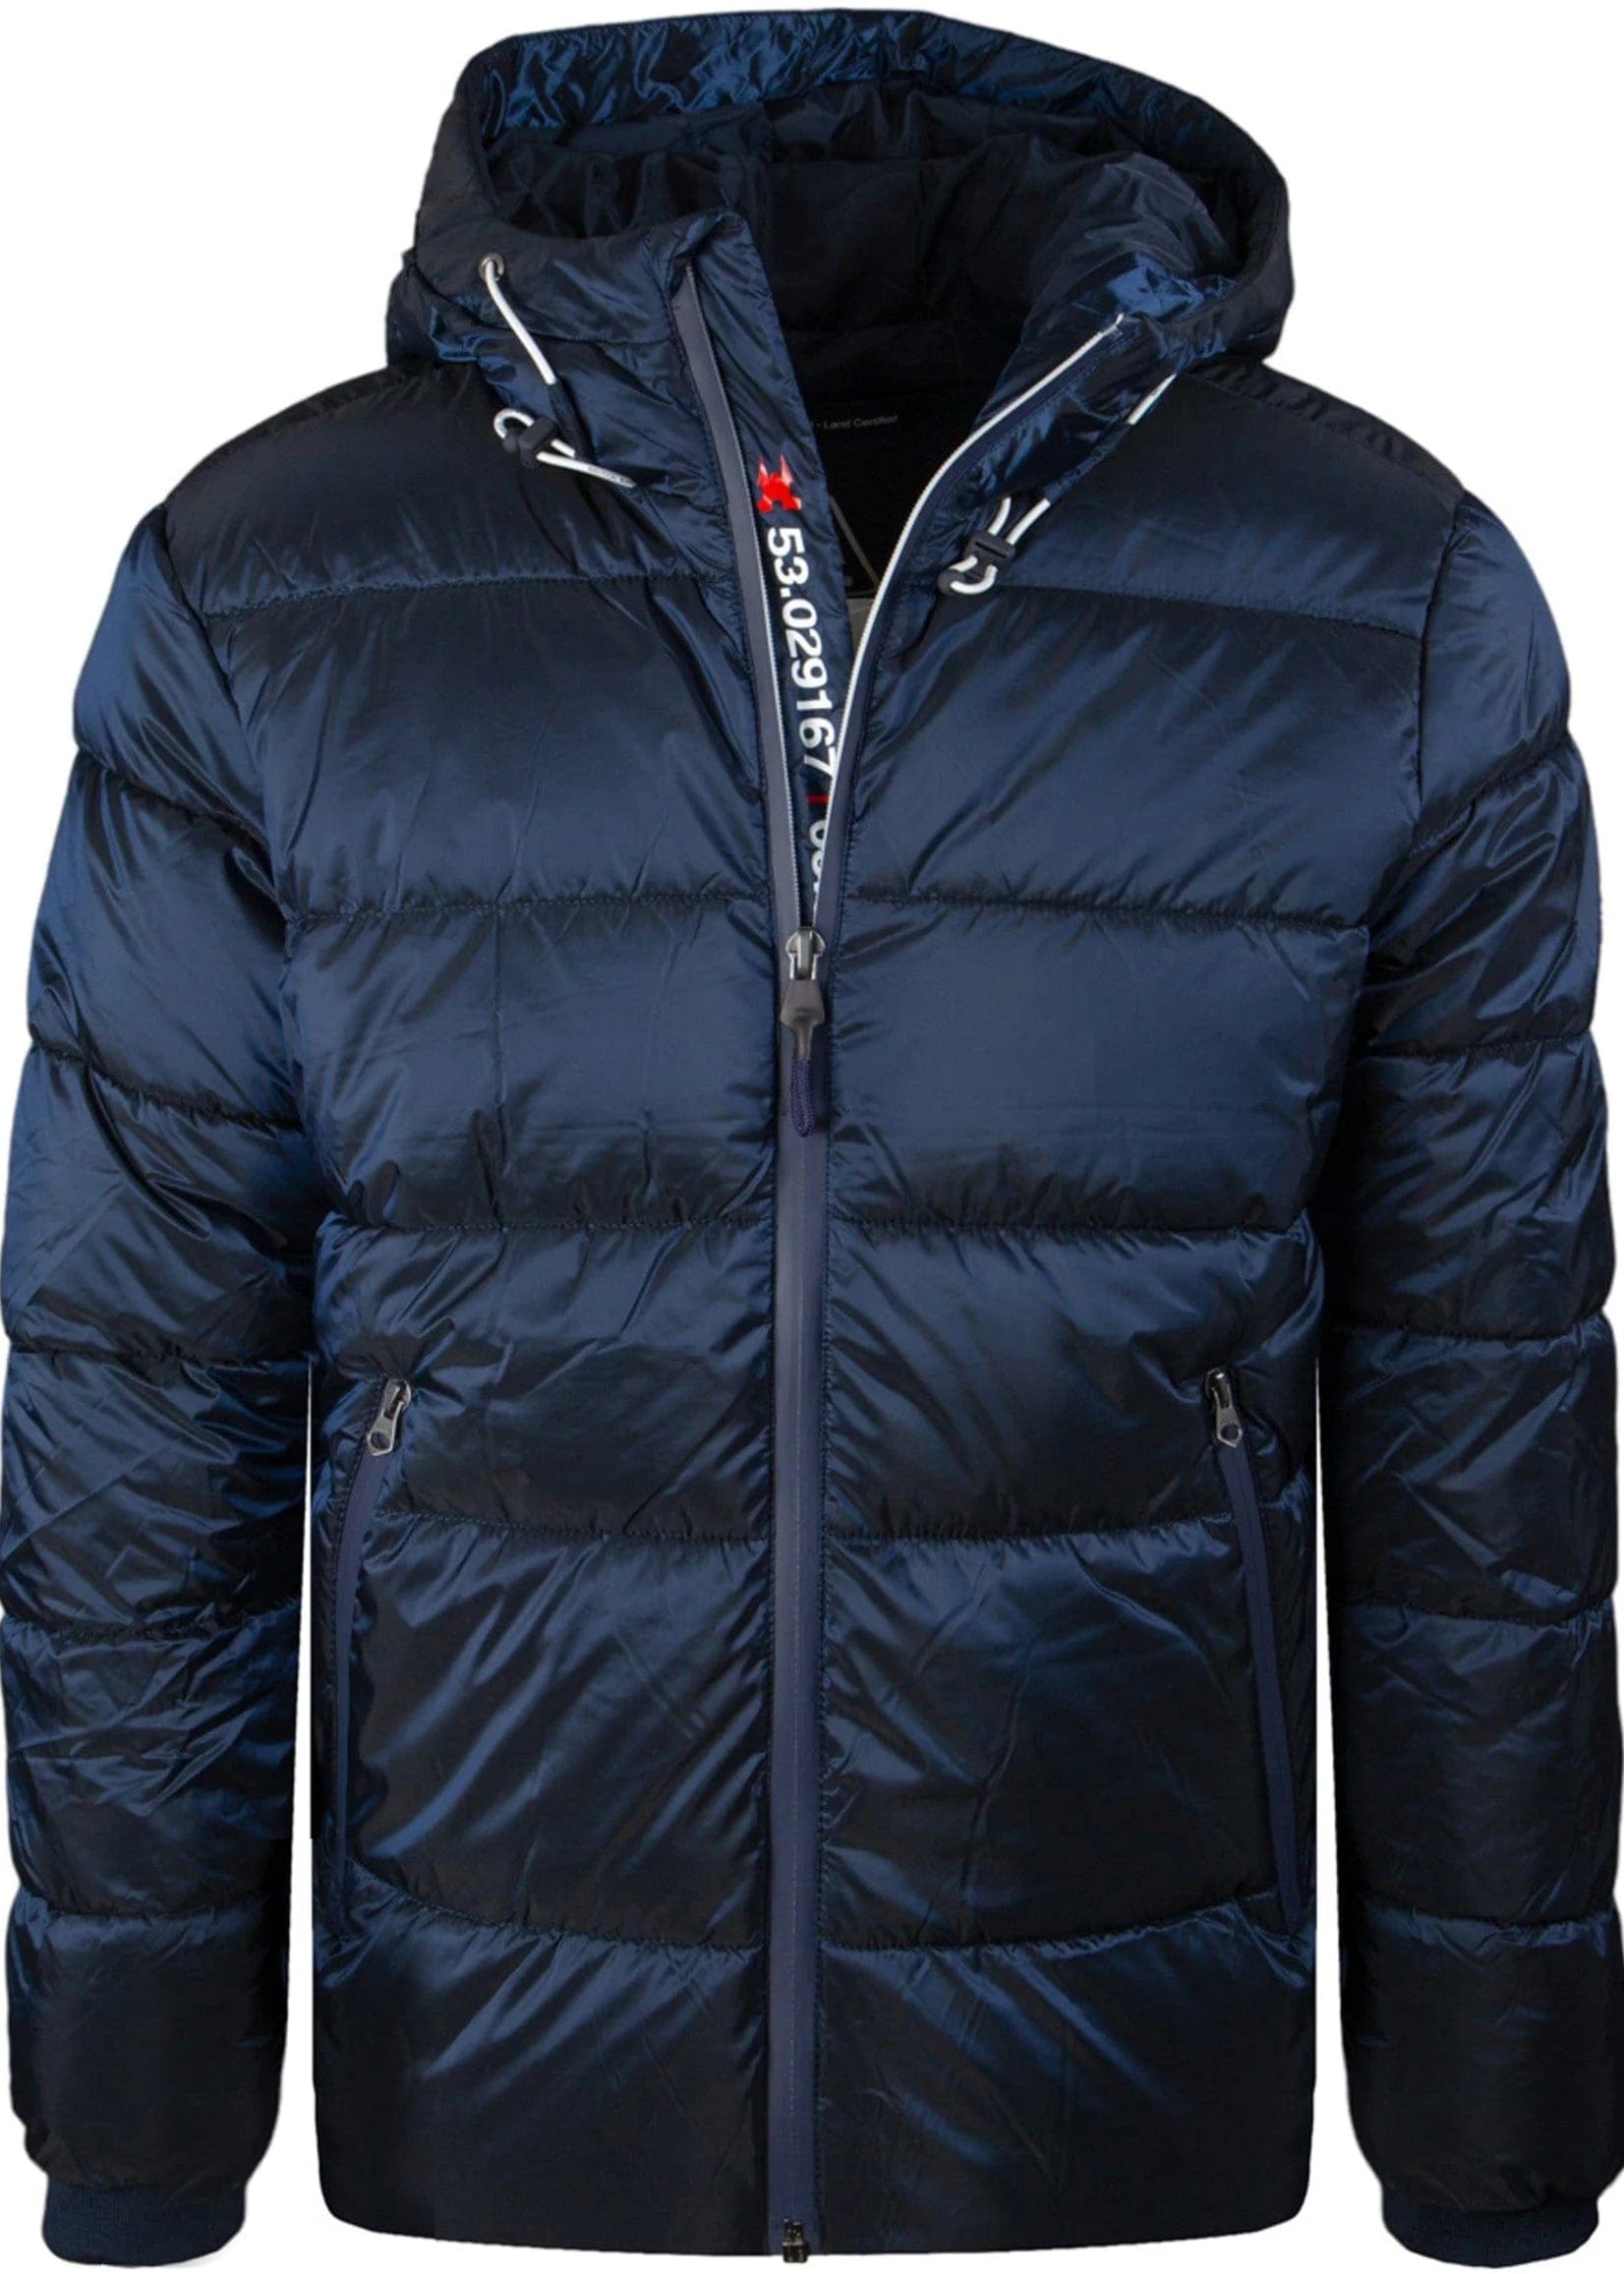 strategie mout video Gaastra Jacket Quilted Dark Blue - 100% recycled nylon - Dark blue -  Stateshop Fashion